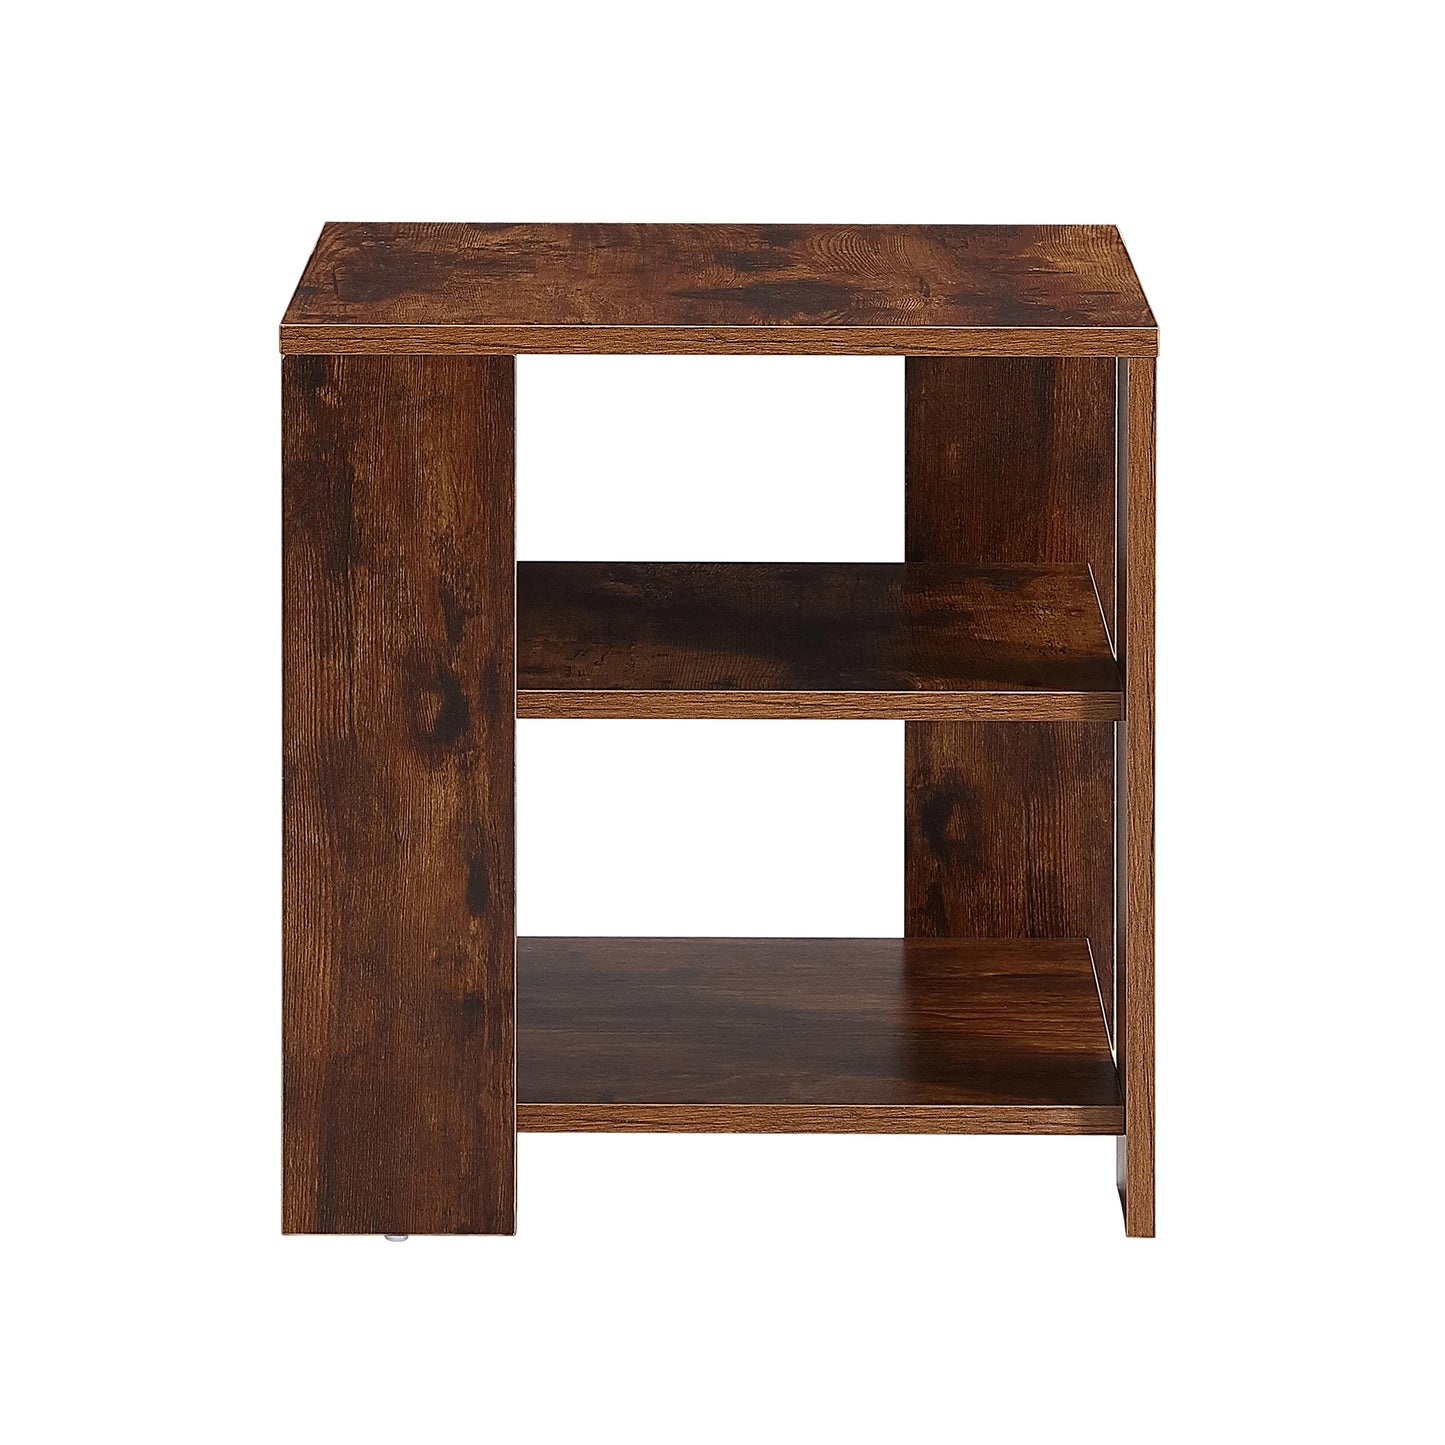 Square side table, rustic brown